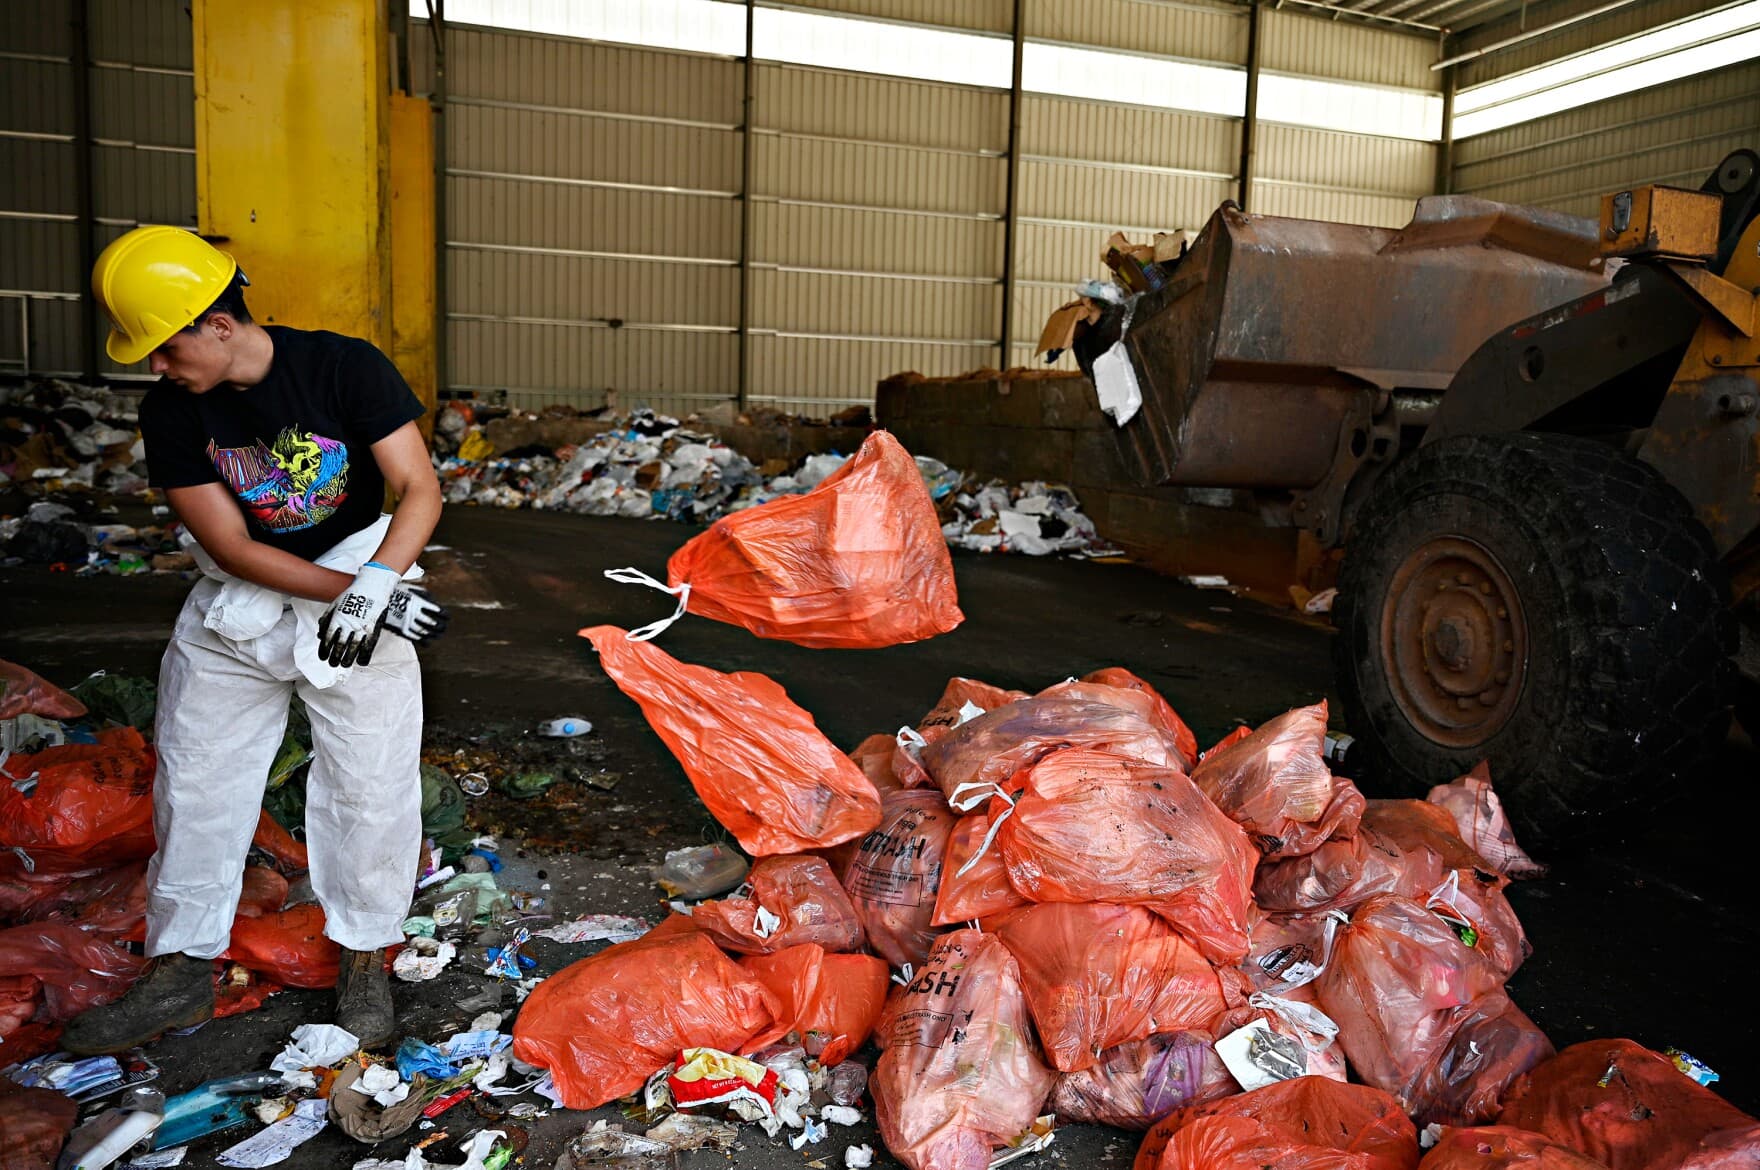 Cody Talento, who works for the city of Meriden, Connecticut, separates bags of trash from bags of food scraps at HQ Dumpsters & Recycling in Southington. The food waste will be taken to an anaerobic digester to be turned into electrical energy and compost. About 1,000 households in Meriden are participating in a municipal food recycling pilot program.